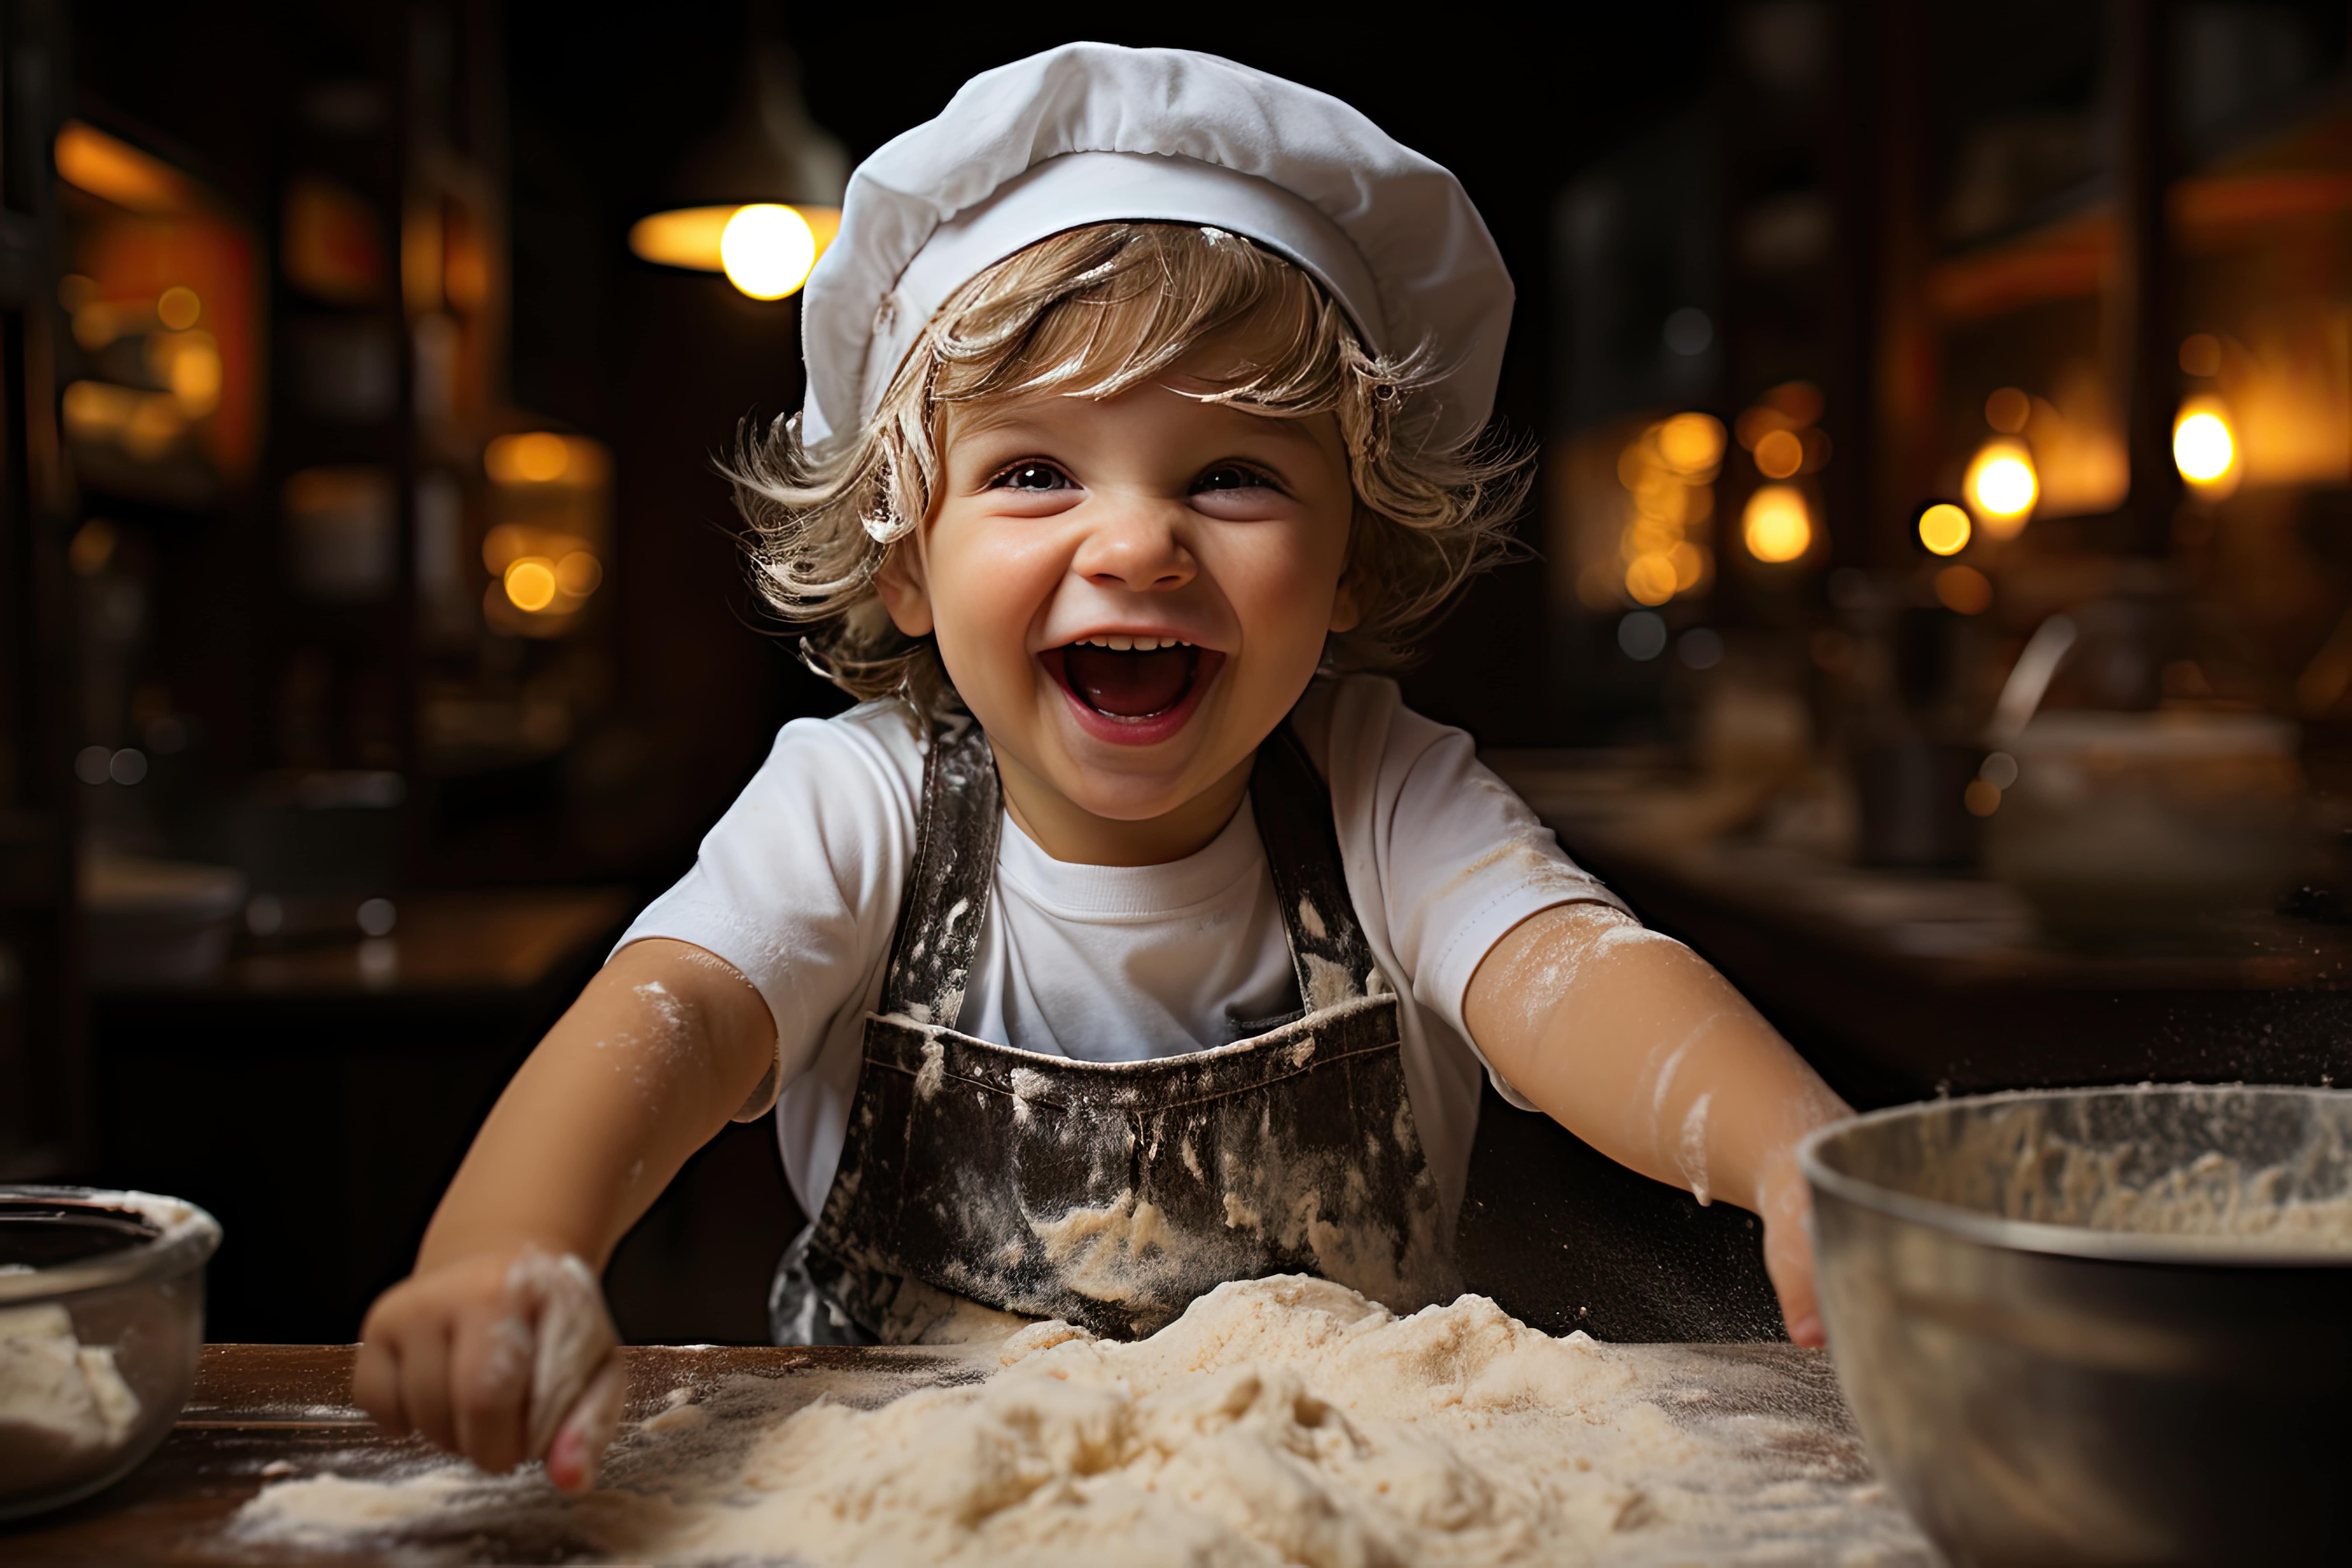 A smiling child covered in flour and dough and wearing a baker's or chef's hat and an apron